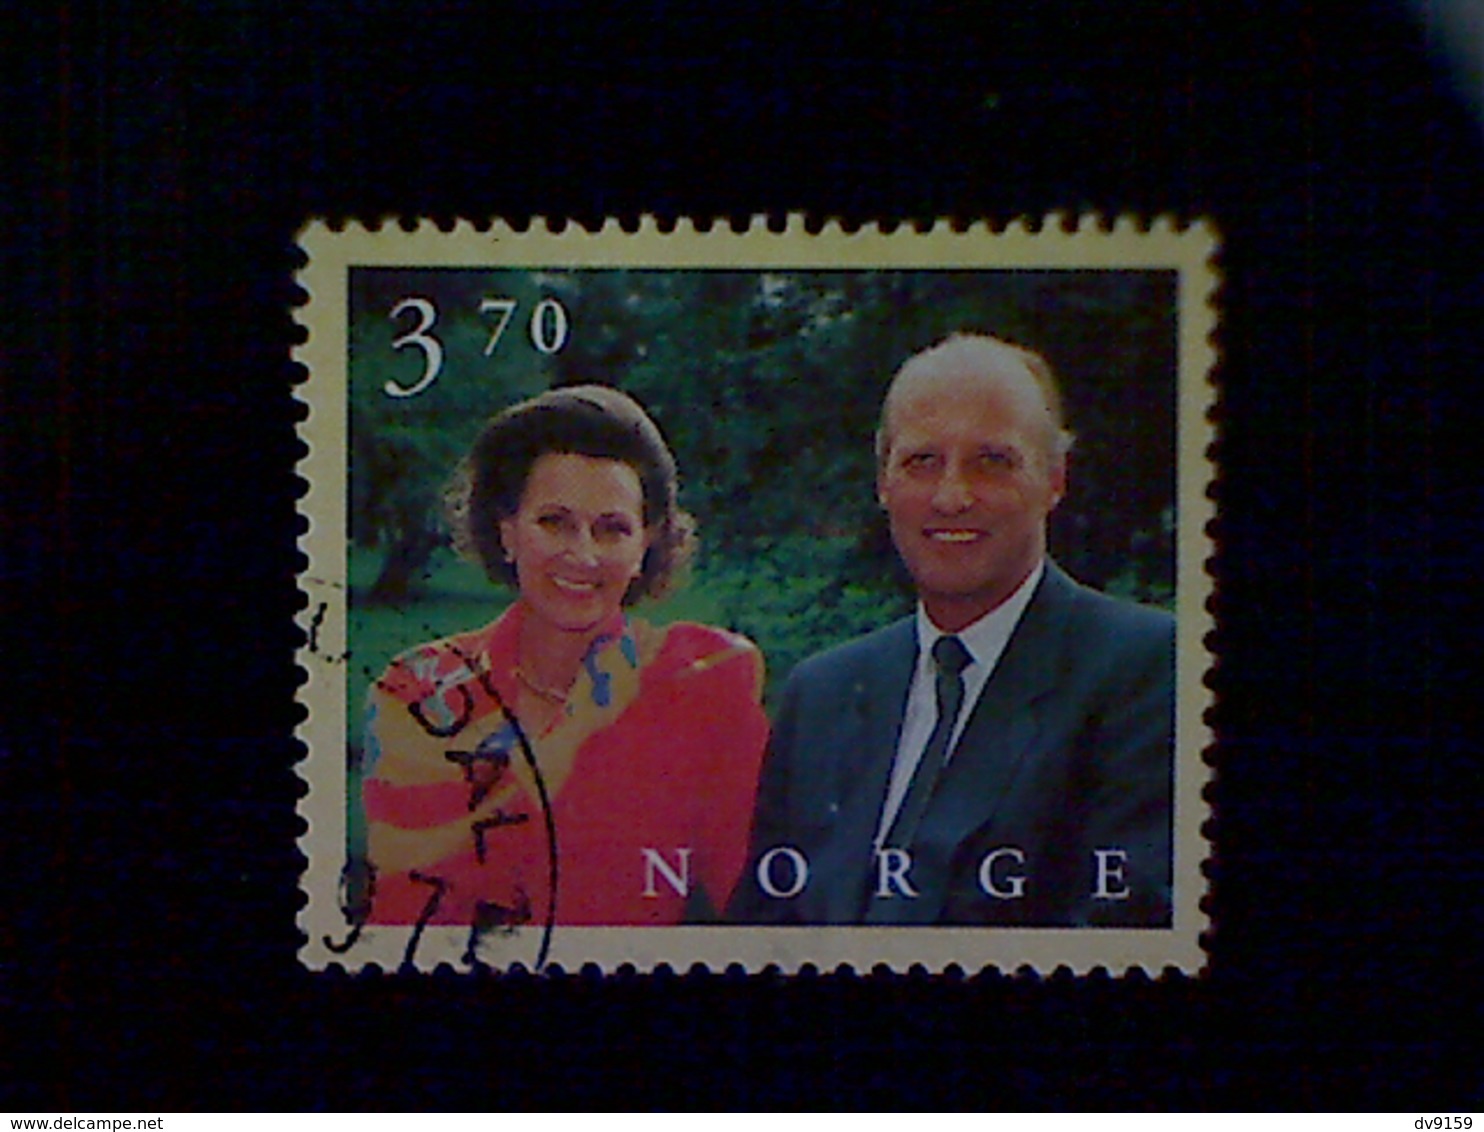 Norway (Norge), Scott #1158, Used (o), 1997, King And Queen, 3.70k, Multicolored - Used Stamps